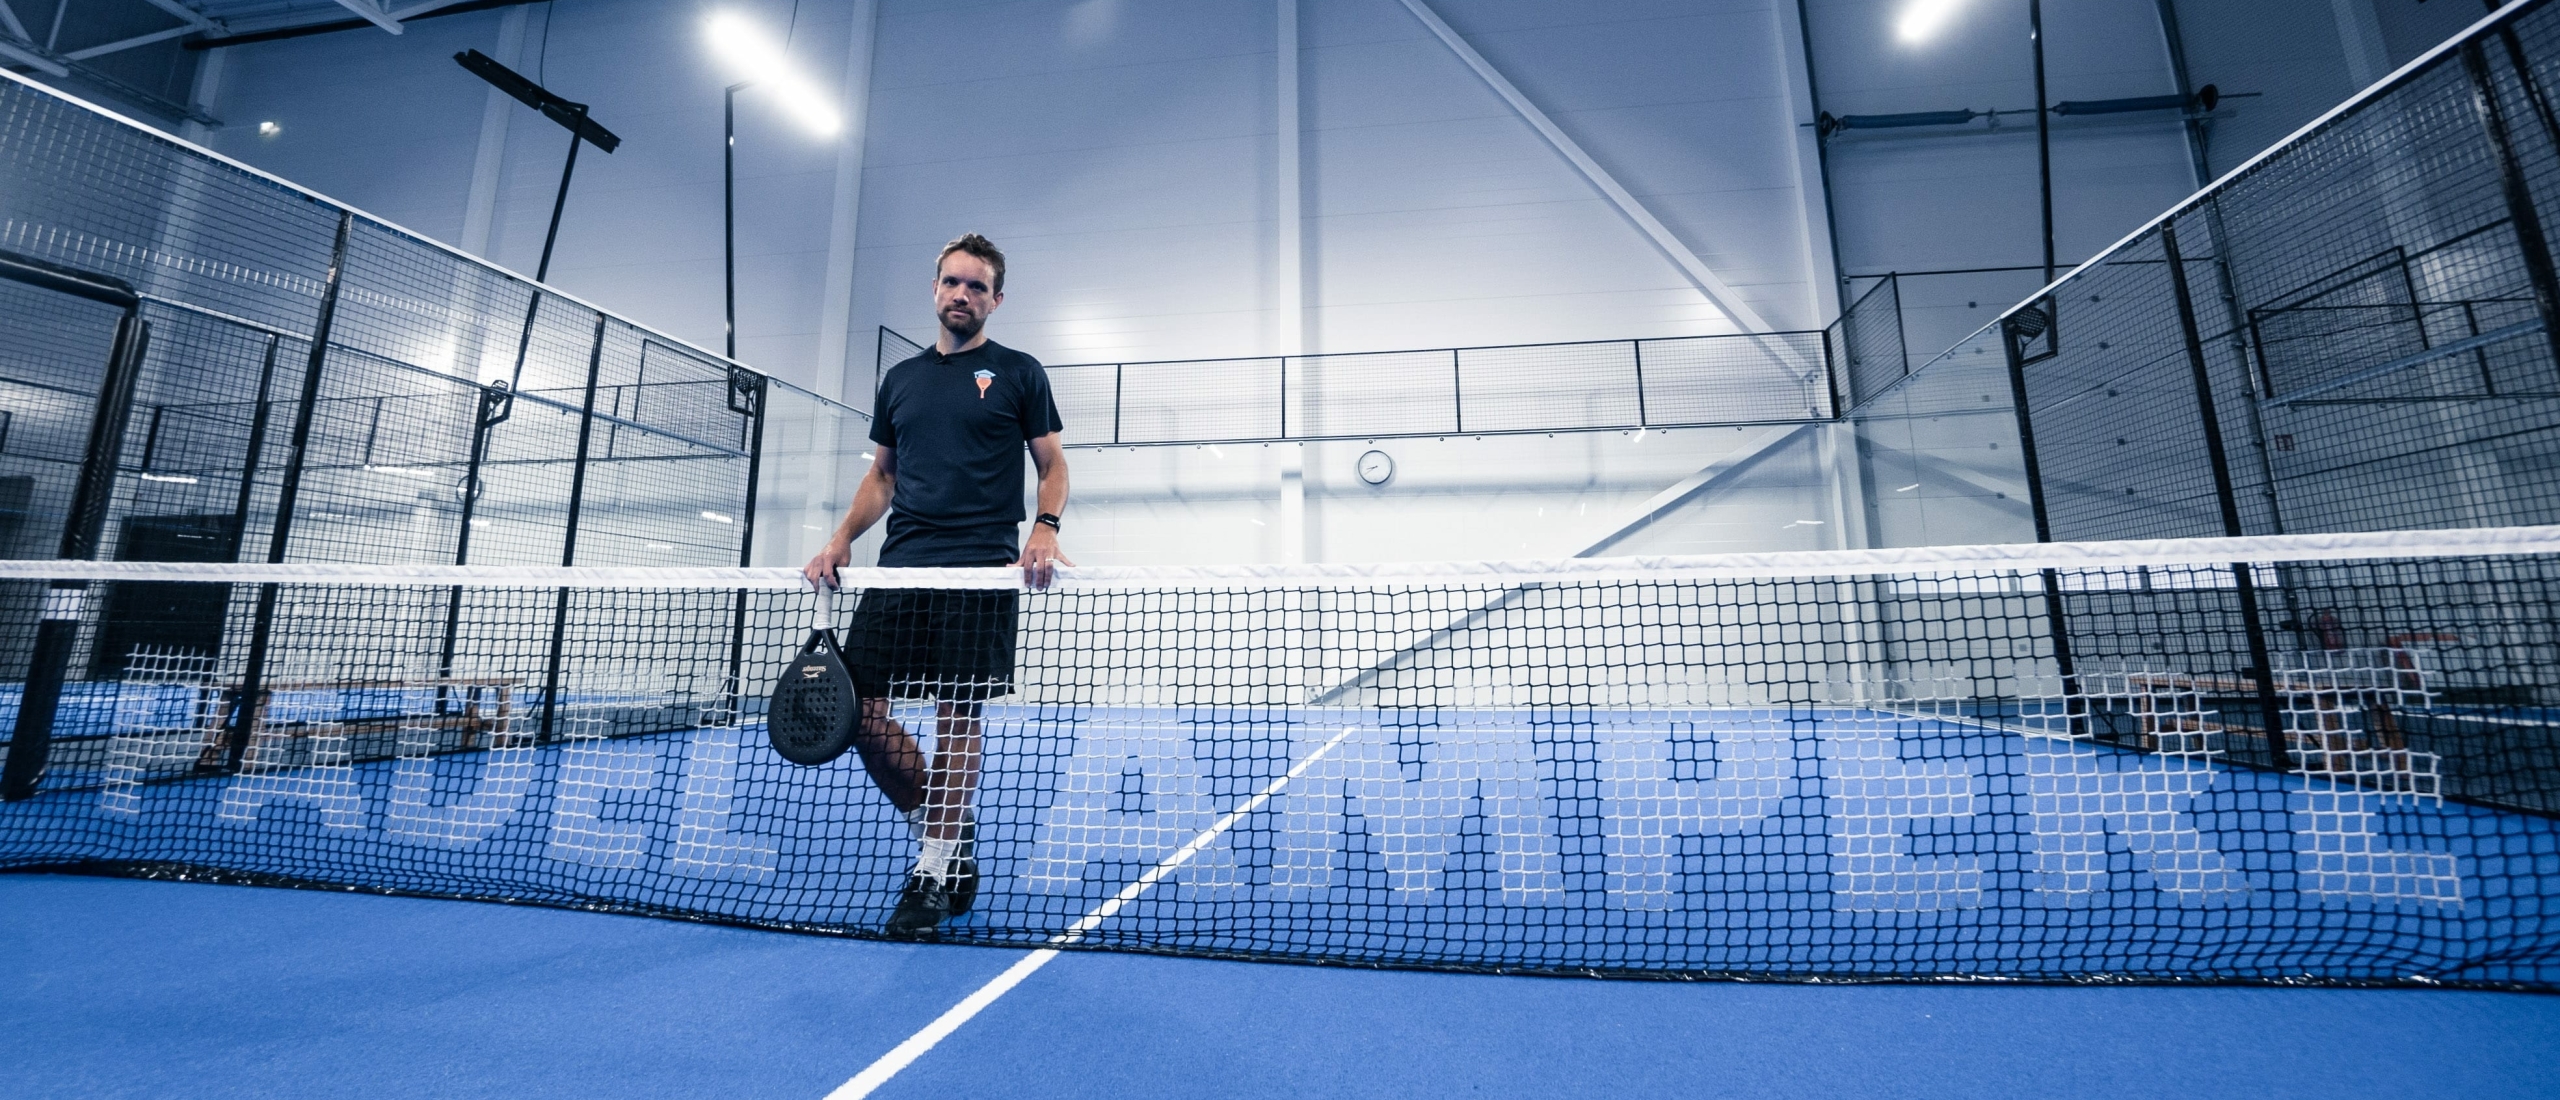 The Future of Padel in Finland is Bright Thanks to This High-Energy Club